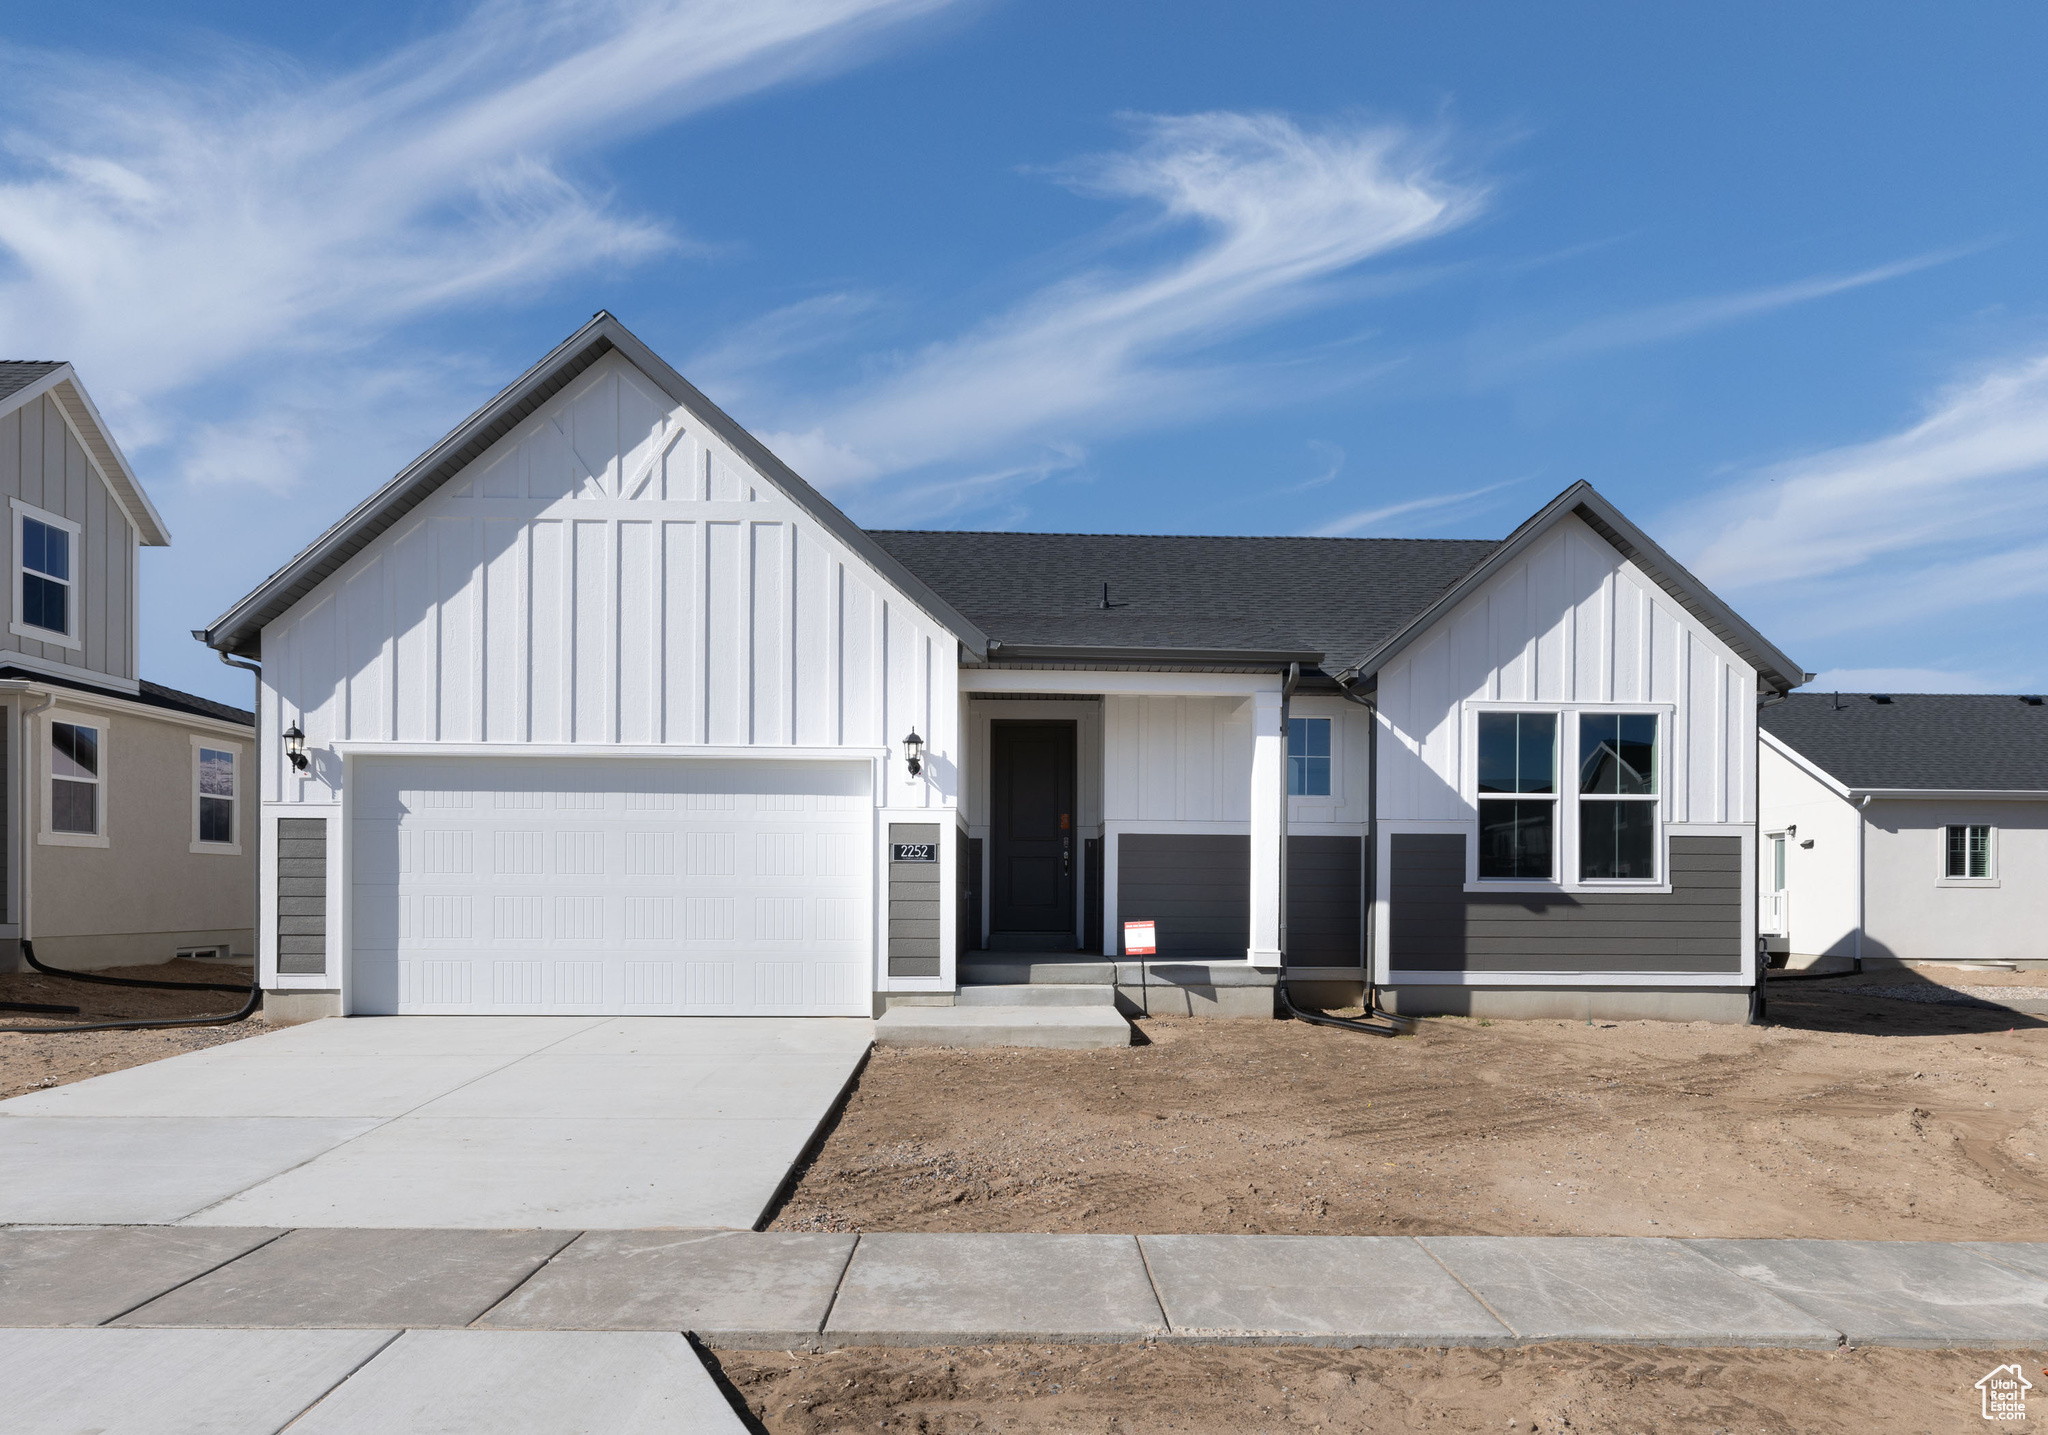 2252 W ROSSOTTI, West Haven, Utah 84401, 3 Bedrooms Bedrooms, 10 Rooms Rooms,2 BathroomsBathrooms,Residential,For sale,ROSSOTTI,1975037